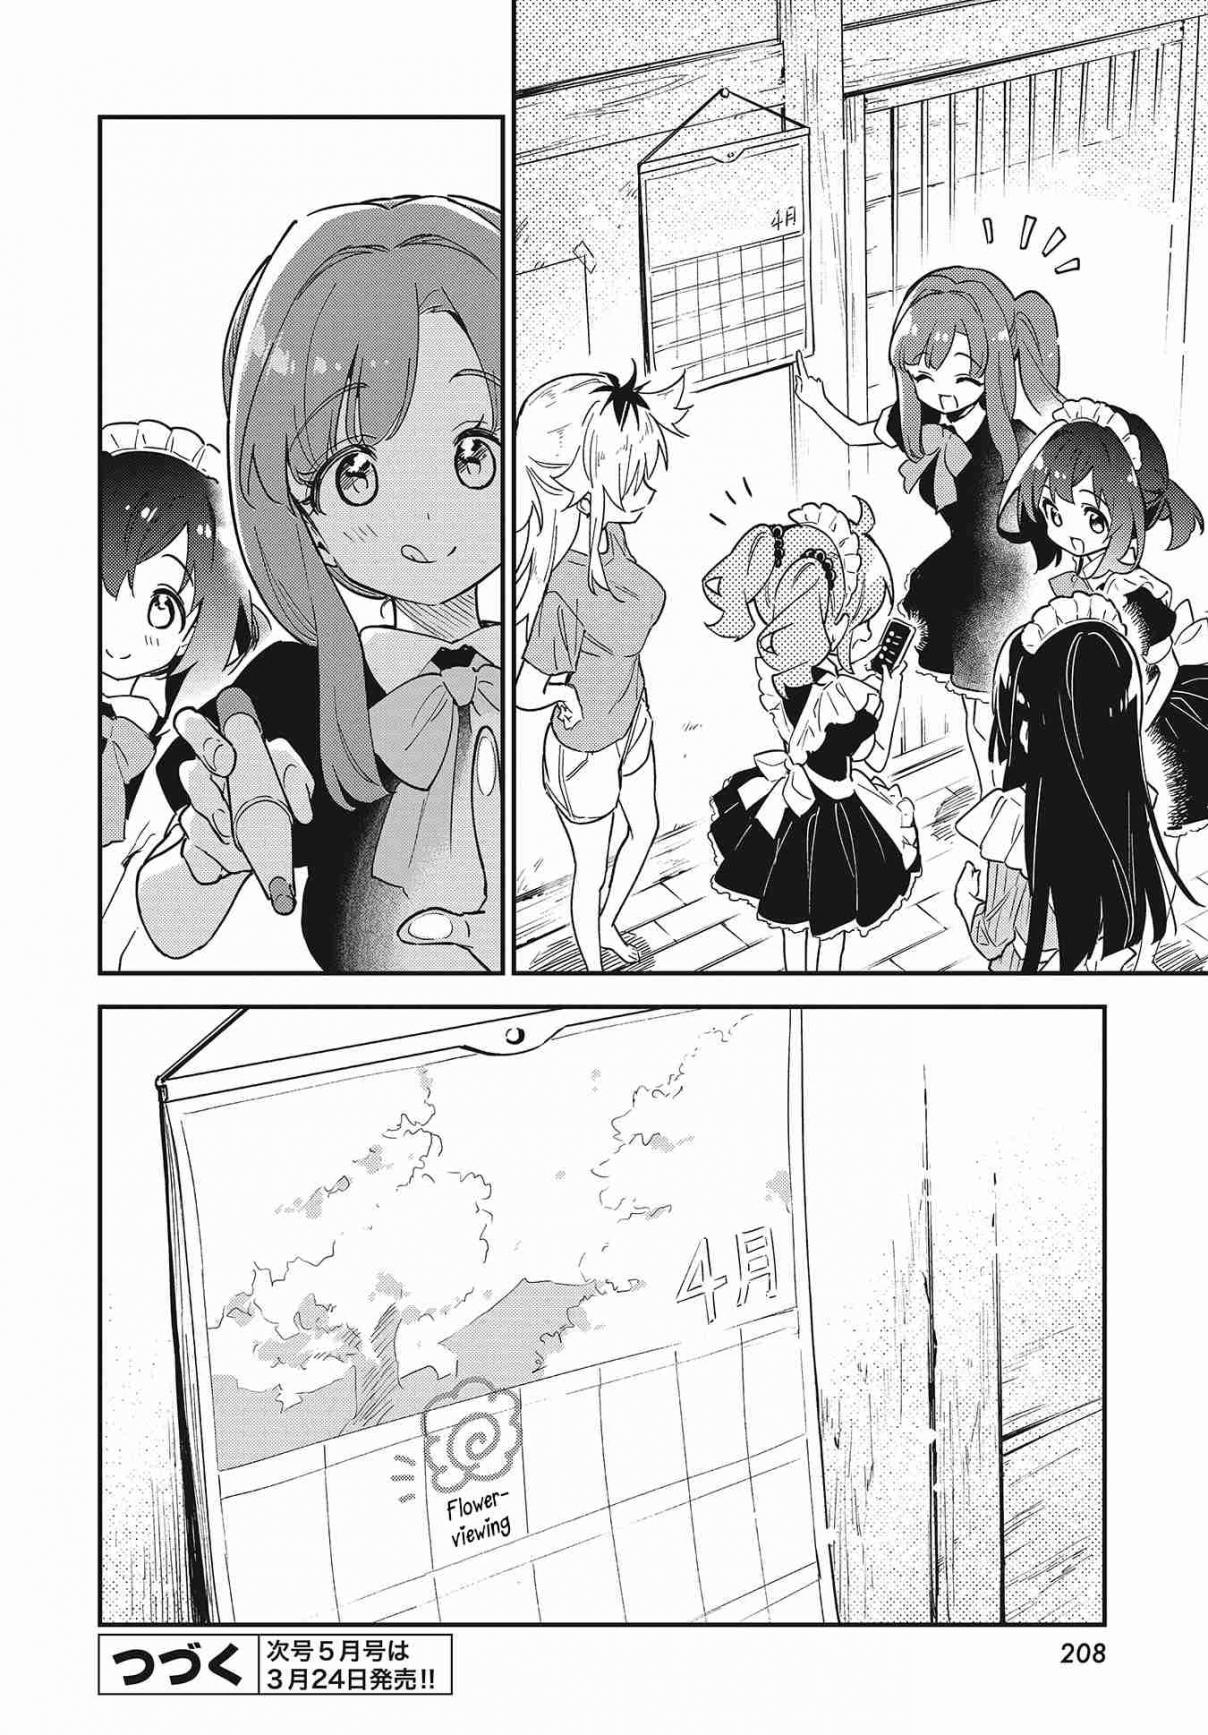 Chotto Ippai! Vol. 6 Ch. 42 A perfect day for cleaning